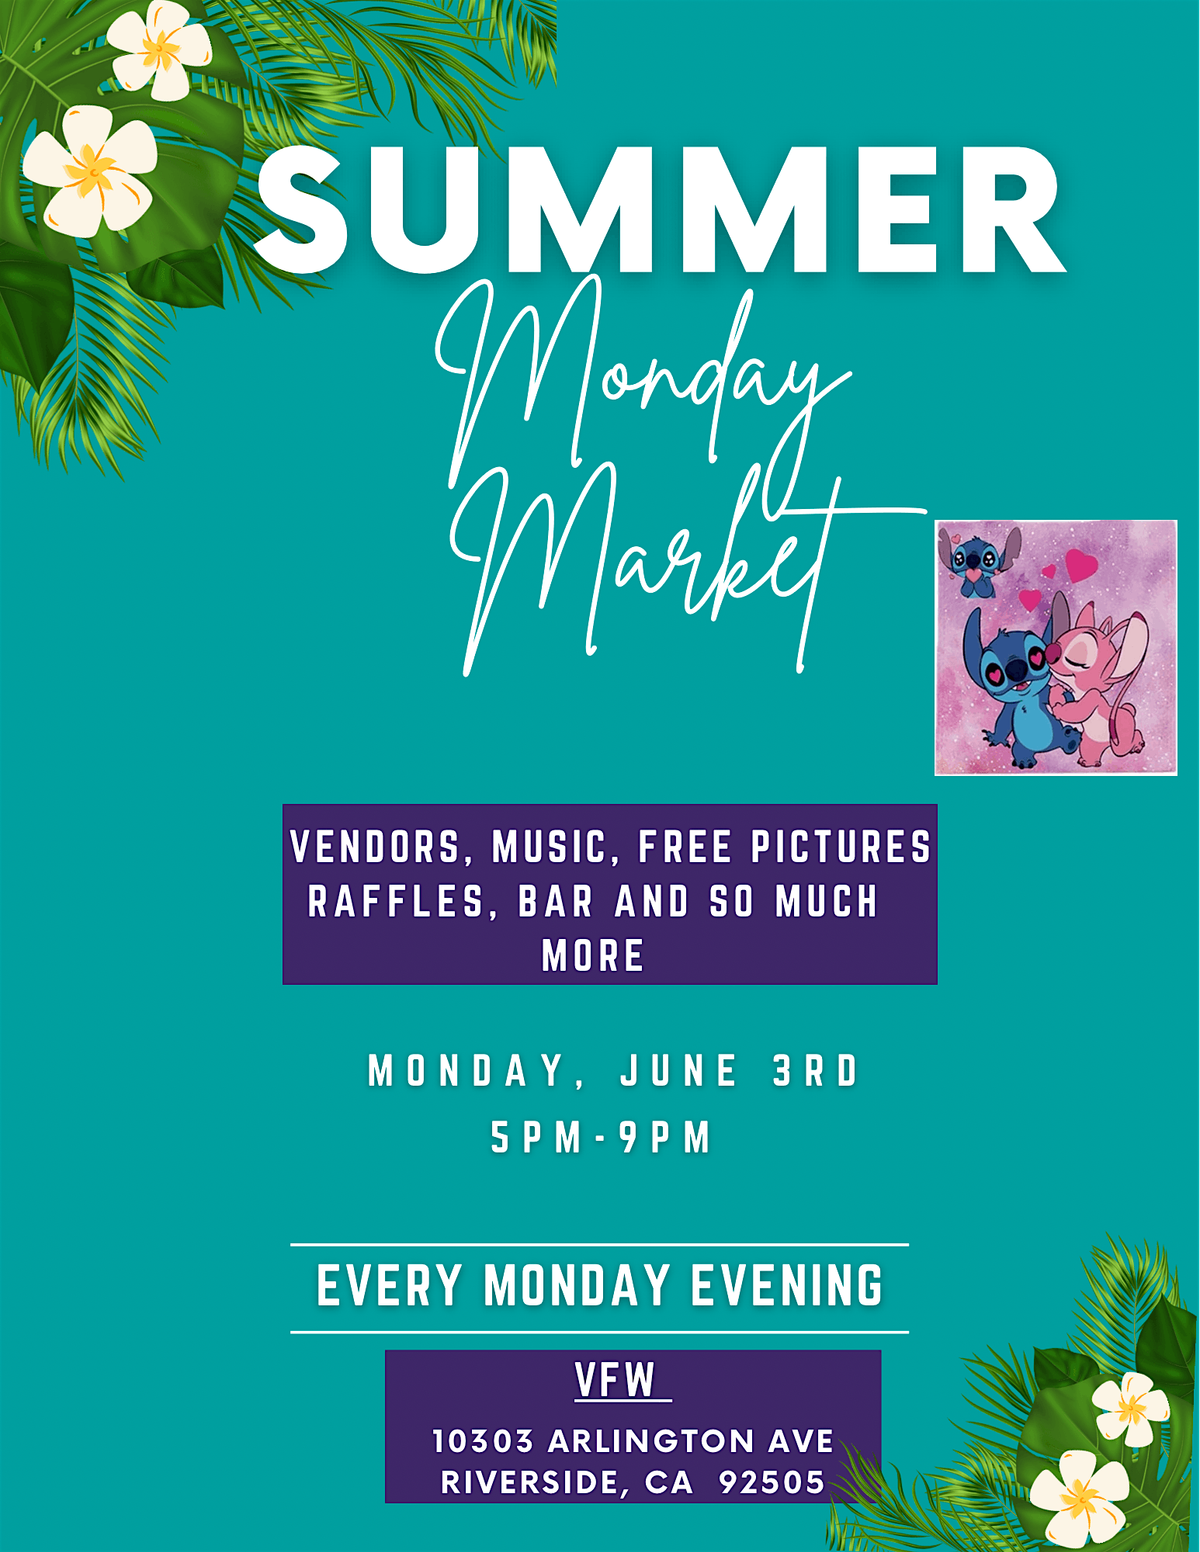 Summer Night Market on Mondays, vendors, food, sweets and music, free photo